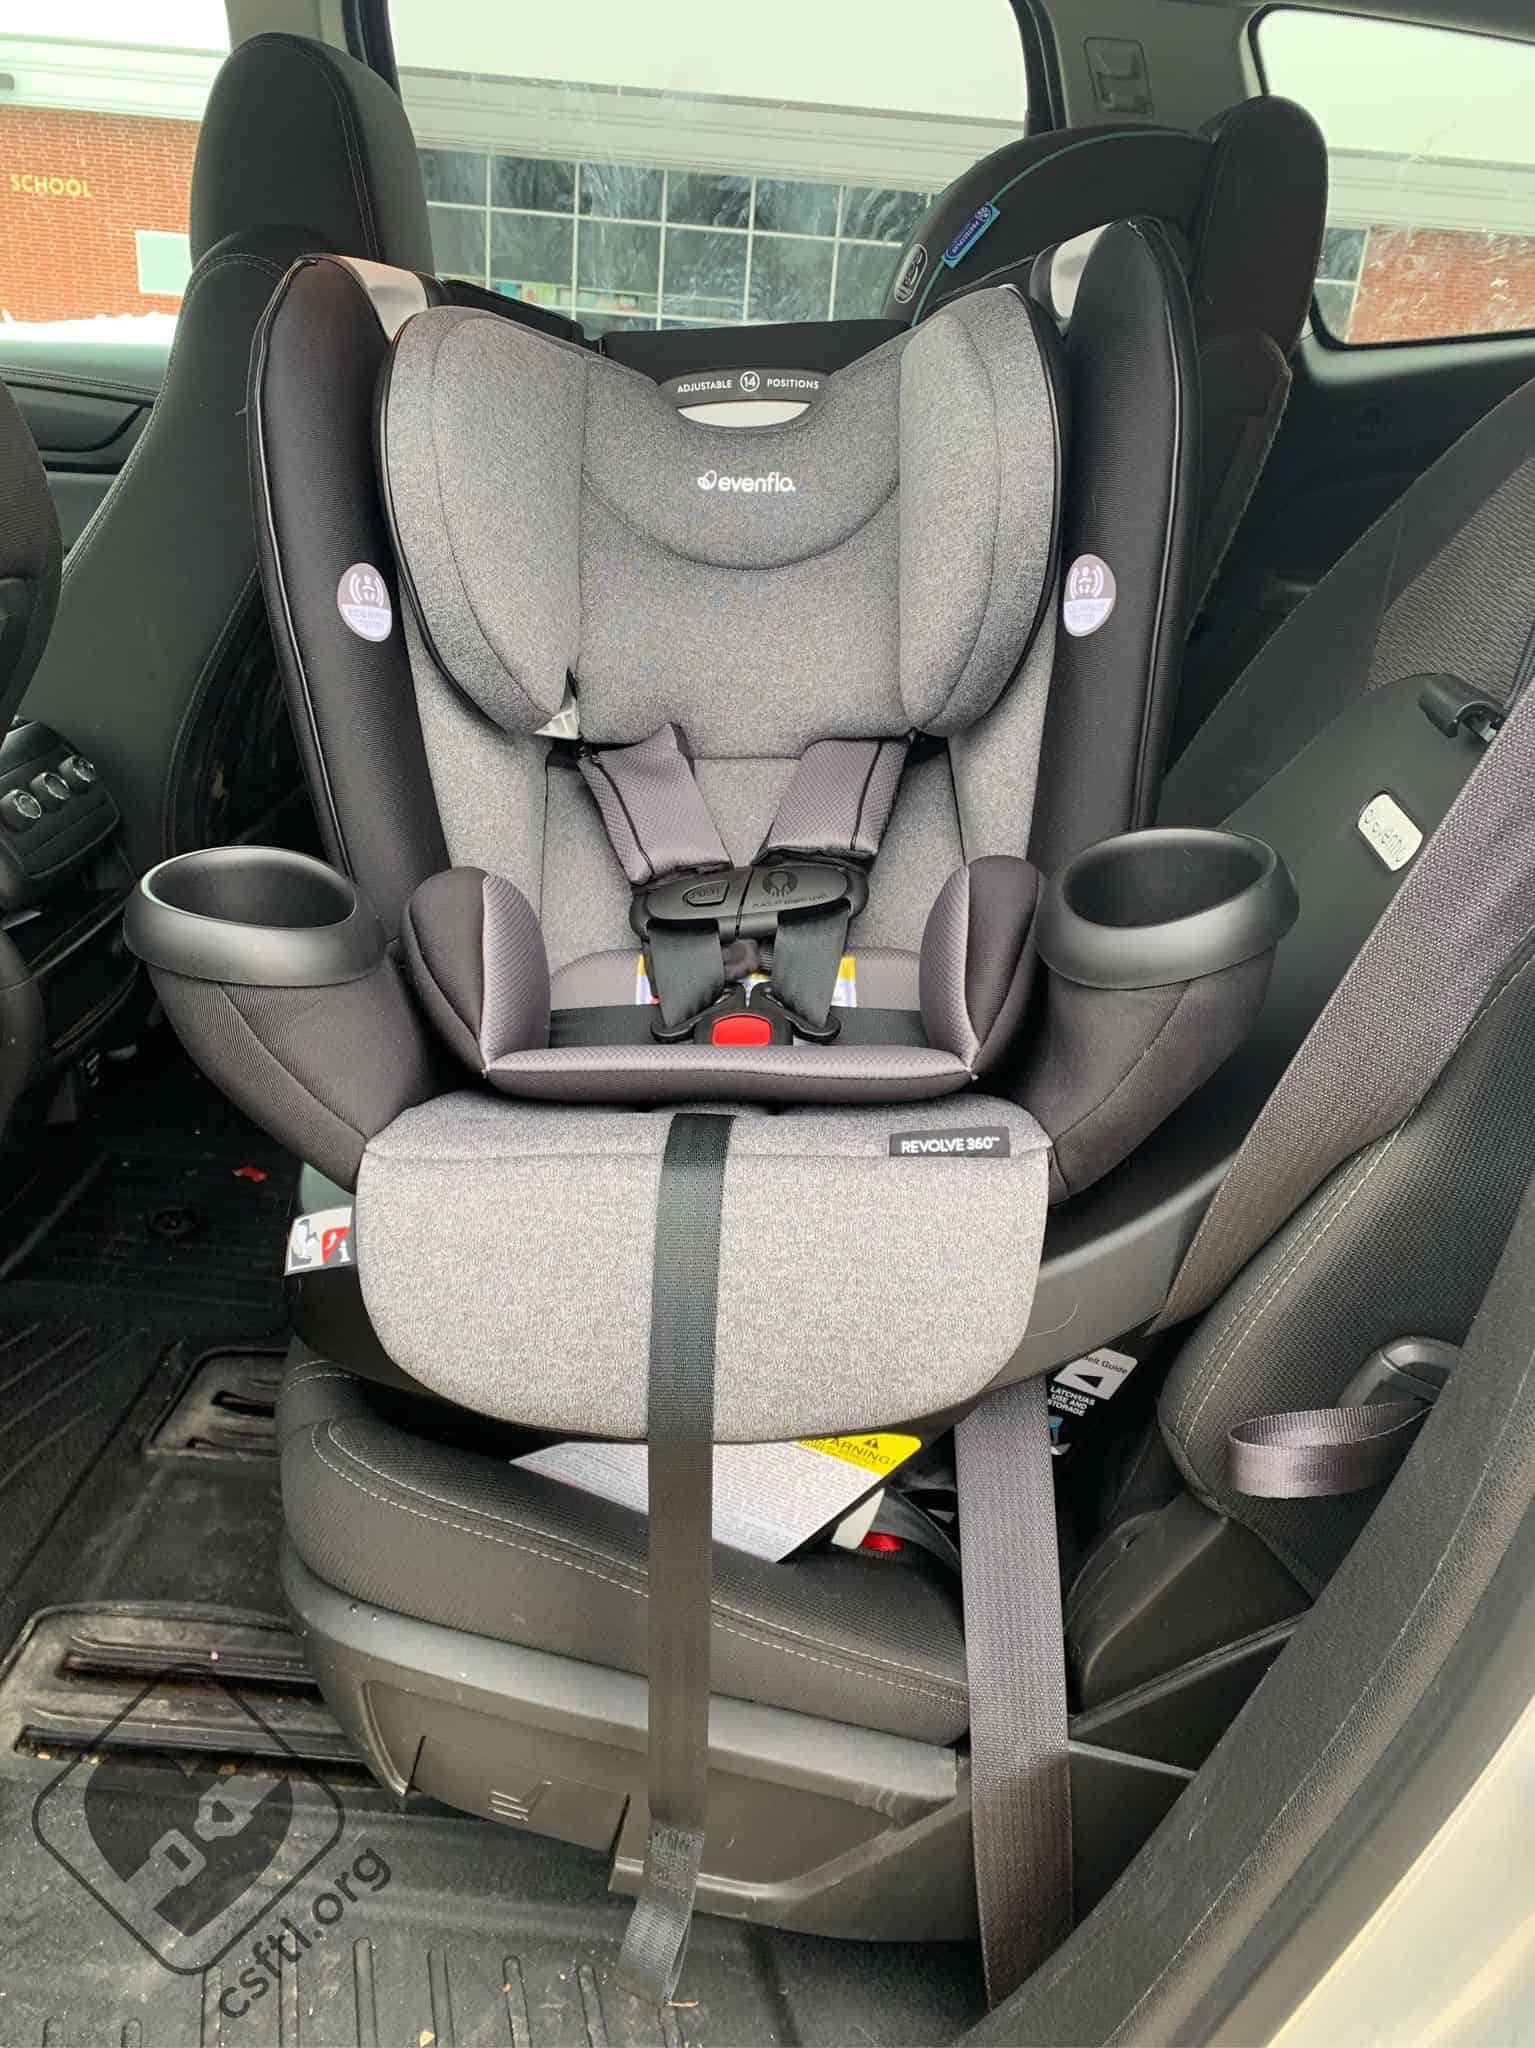 Car Seats and Caregivers who Face Unique Challenges - Car Seats For The  Littles